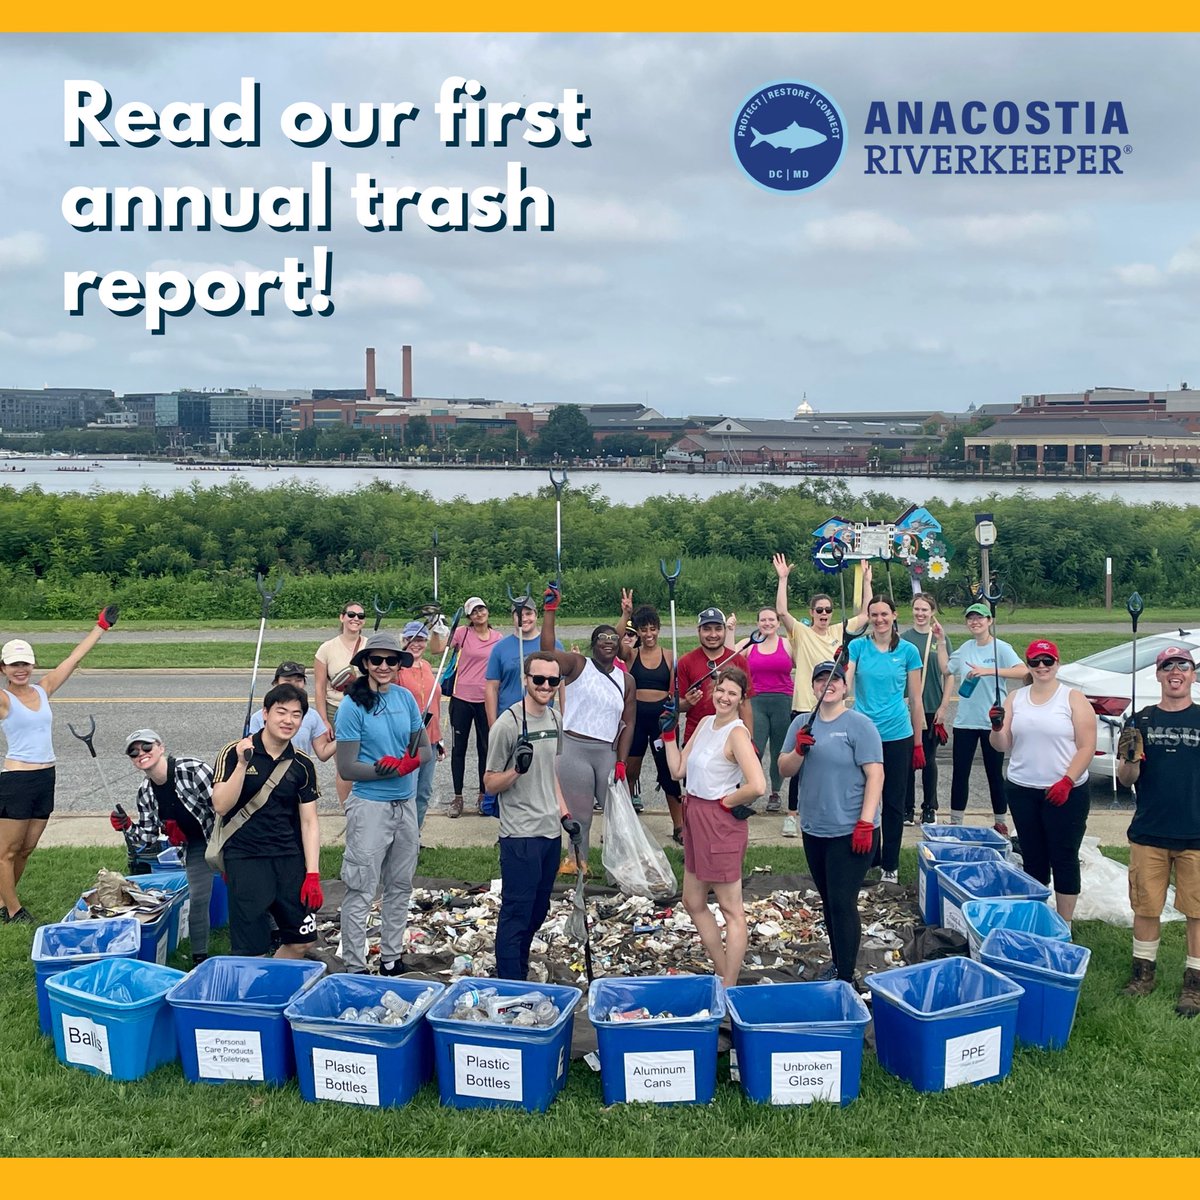 This Earth Day, we are pleased to release Anacostia Riverkeeper's first annual Trash Mitigation Report! Learn about trends in our data, the impact of policies, and how to get involved to achieve a #TrashFree Anacostia River for all. Read the report: anacostiariverkeeper.org/wp-content/upl…